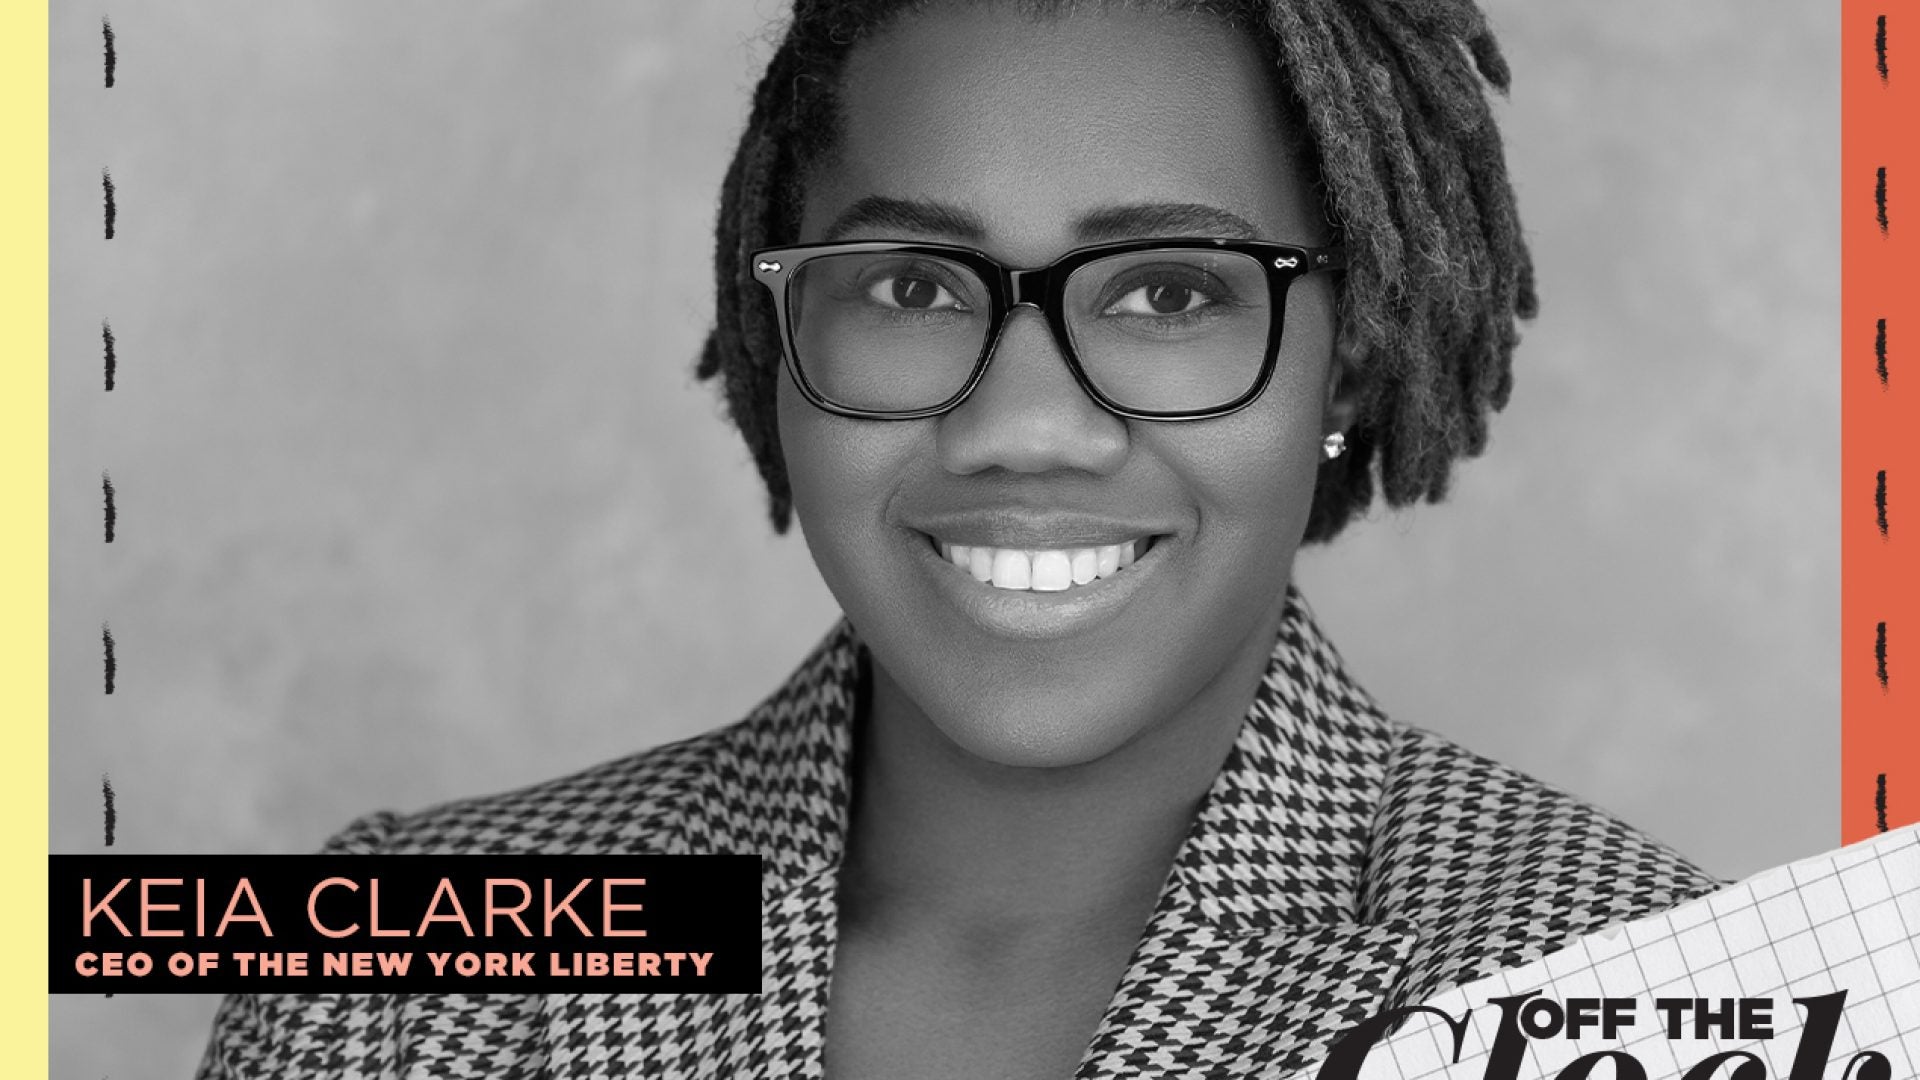 Off The Clock With Keia Clarke, CEO of the New York Liberty